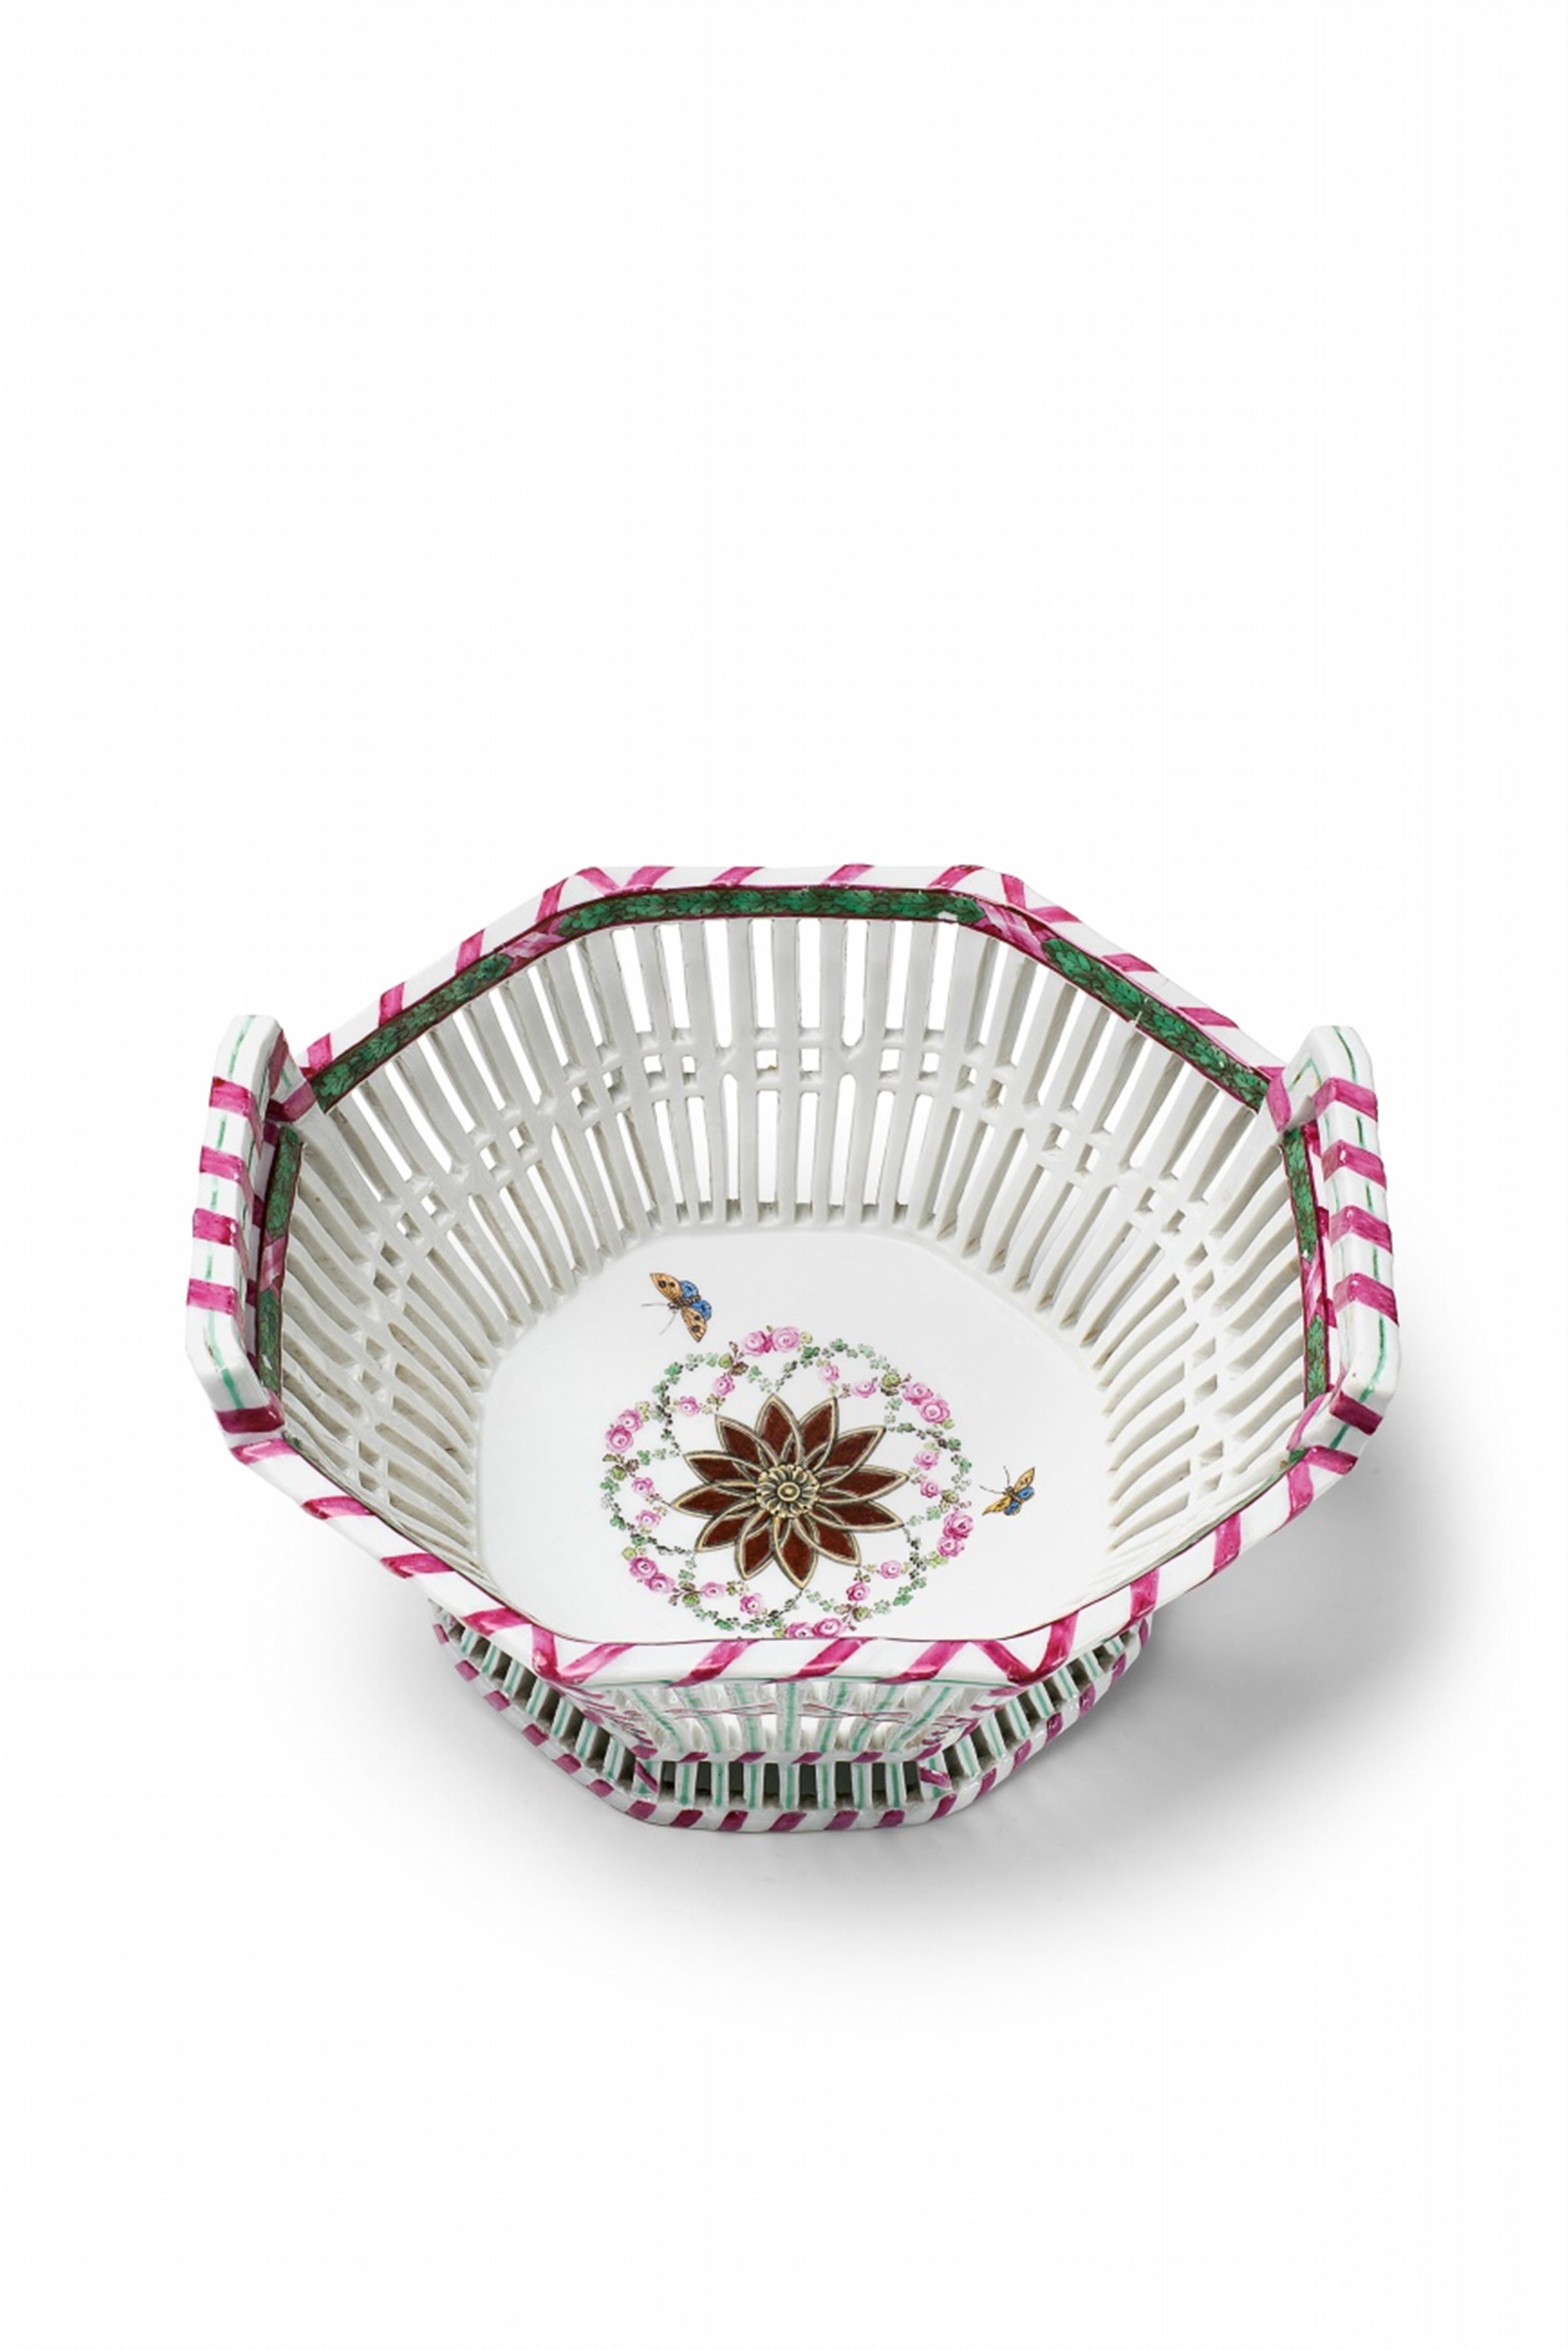 A Berlin KPM porcelain basket from the dessert service made for Crown Prince Frederick William - image-1